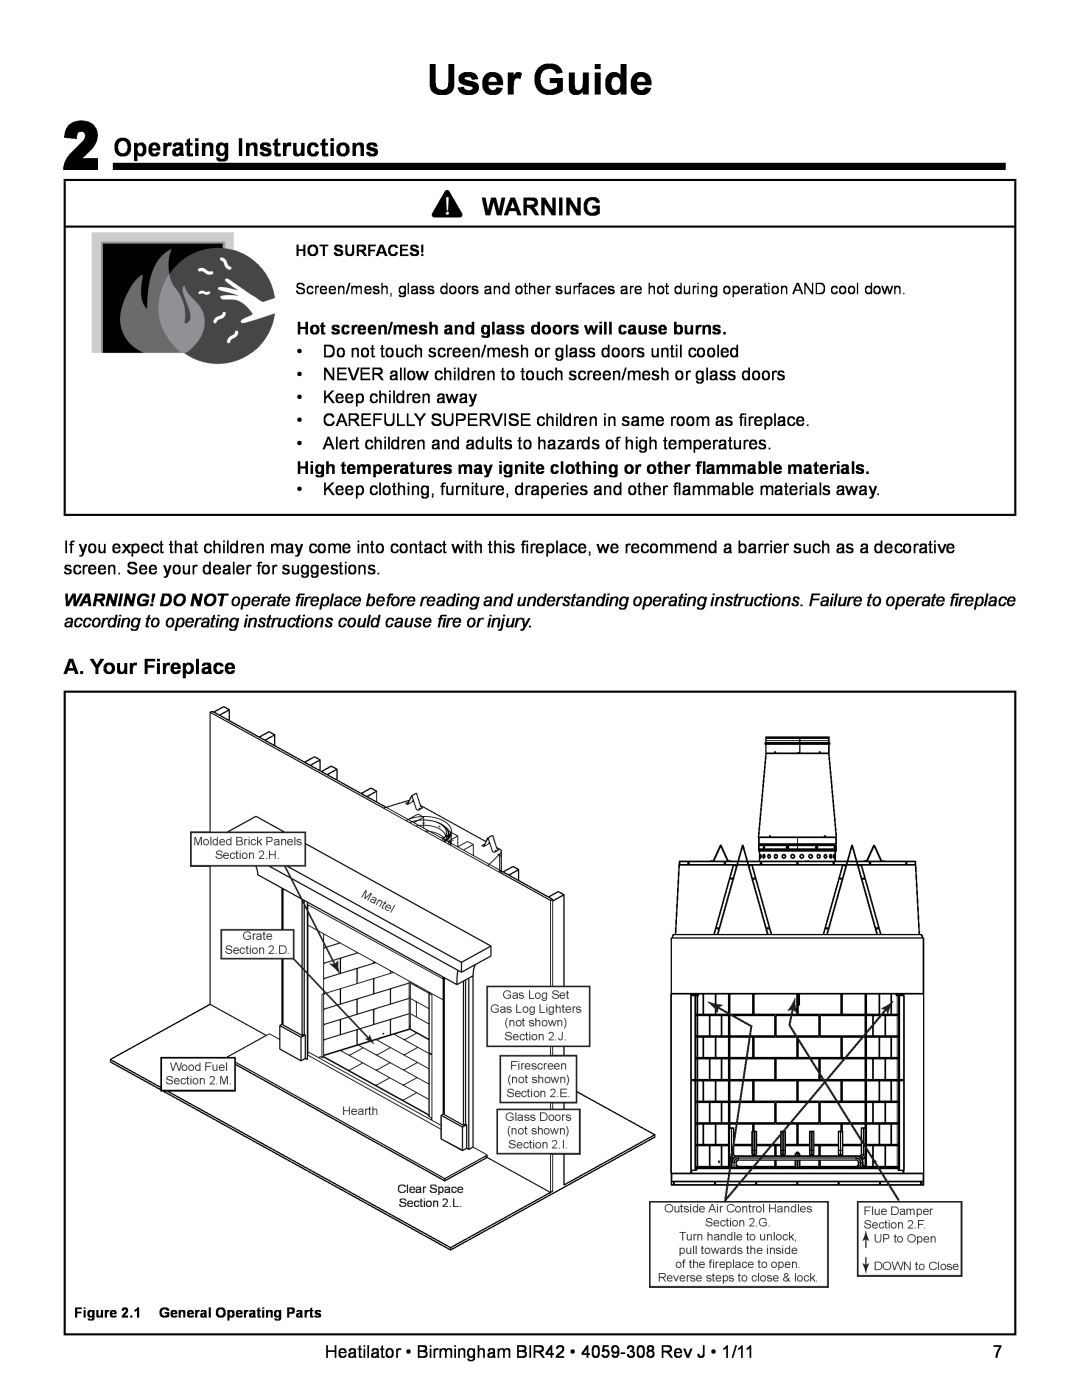 Heatiator BIR42 User Guide, Operating Instructions, A. Your Fireplace, Hot screen/mesh and glass doors will cause burns 